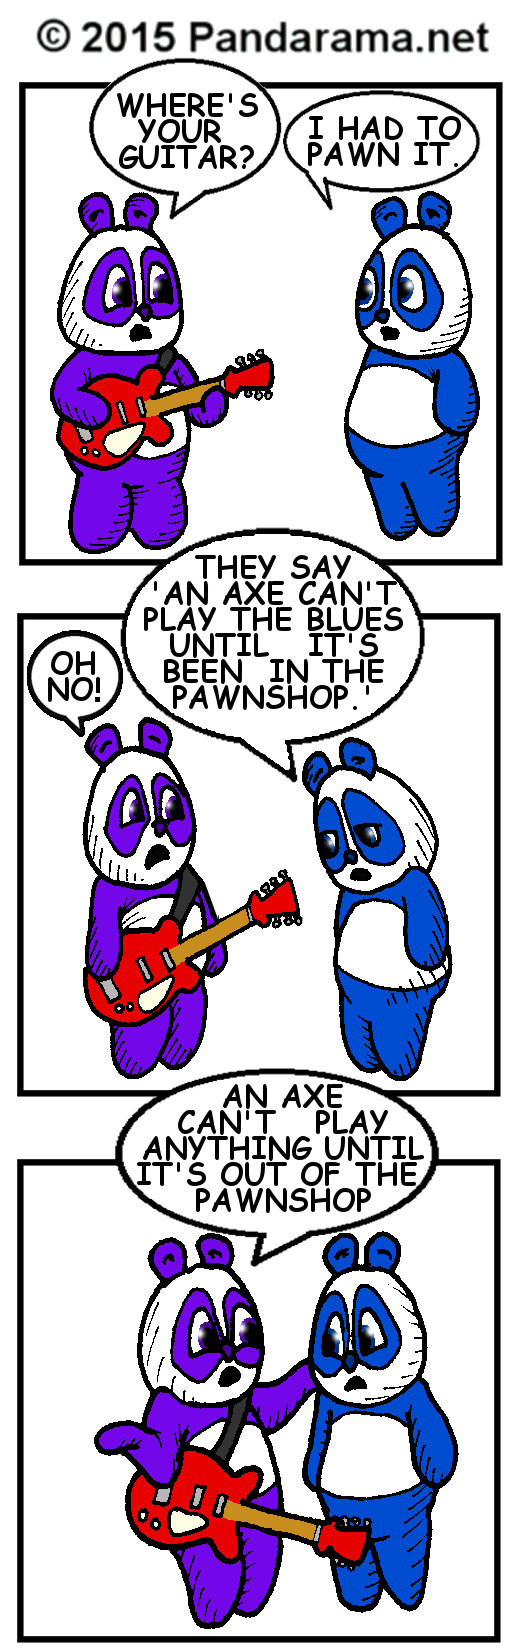 Pandarama cartoon: An axe (guitar) can't play the blues until it's been in a pawnshop, but it can't play anything until it's out of the pawnshop.